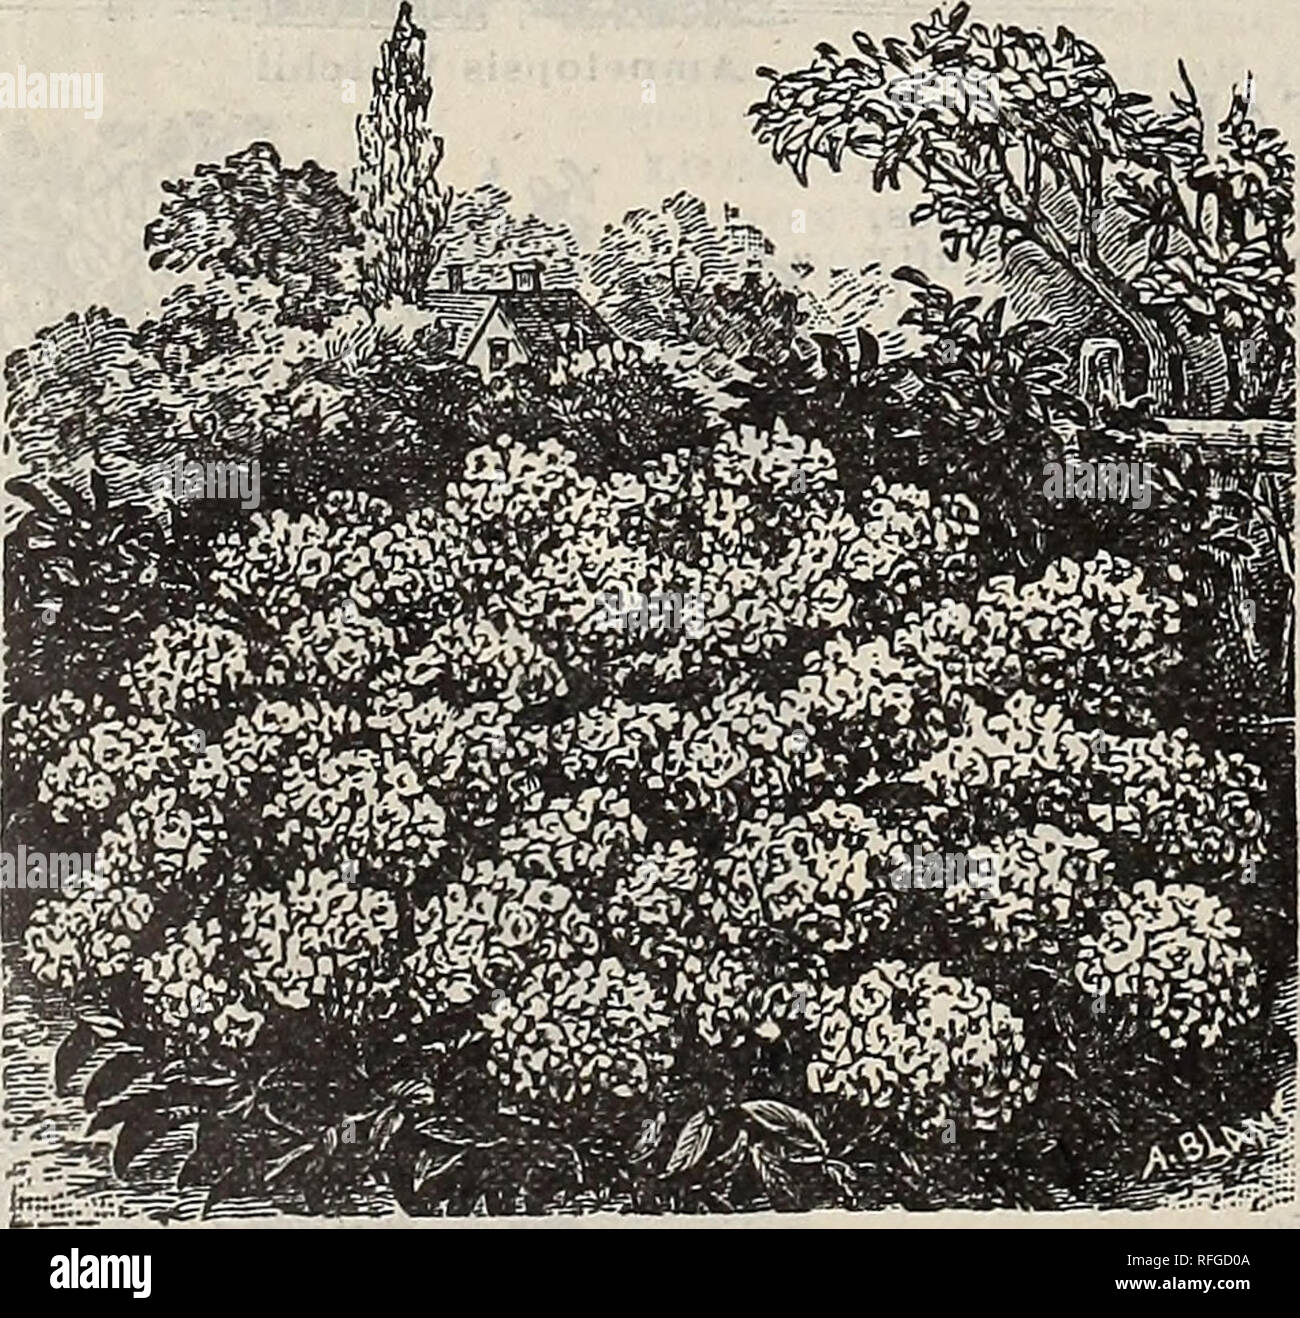 . Spring catalogue : 1900. Nurseries (Horticulture) Missouri Saint Louis Catalogs; Bulbs (Plants) Catalogs; Flowers Catalogs; Vegetables Seeds Catalogs; Plants, Ornamental Catalogs; Shrubs Catalogs; Fruit Catalogs. DICENTRA SPECTABILIS (Bleeding Heart) A hardy perennial plant, with rose-colored flowers in great abundance; one of the best border plants; perfectly hardy and easily cultivated; two feet high; flowers in April or May {see cut). Each, 25c.. Achillea, The Pearl ACHILLEA, &quot;THE PEARL&quot; OneCof the very best white-flowered plants for the border. The flowers are borne in the grea Stock Photo